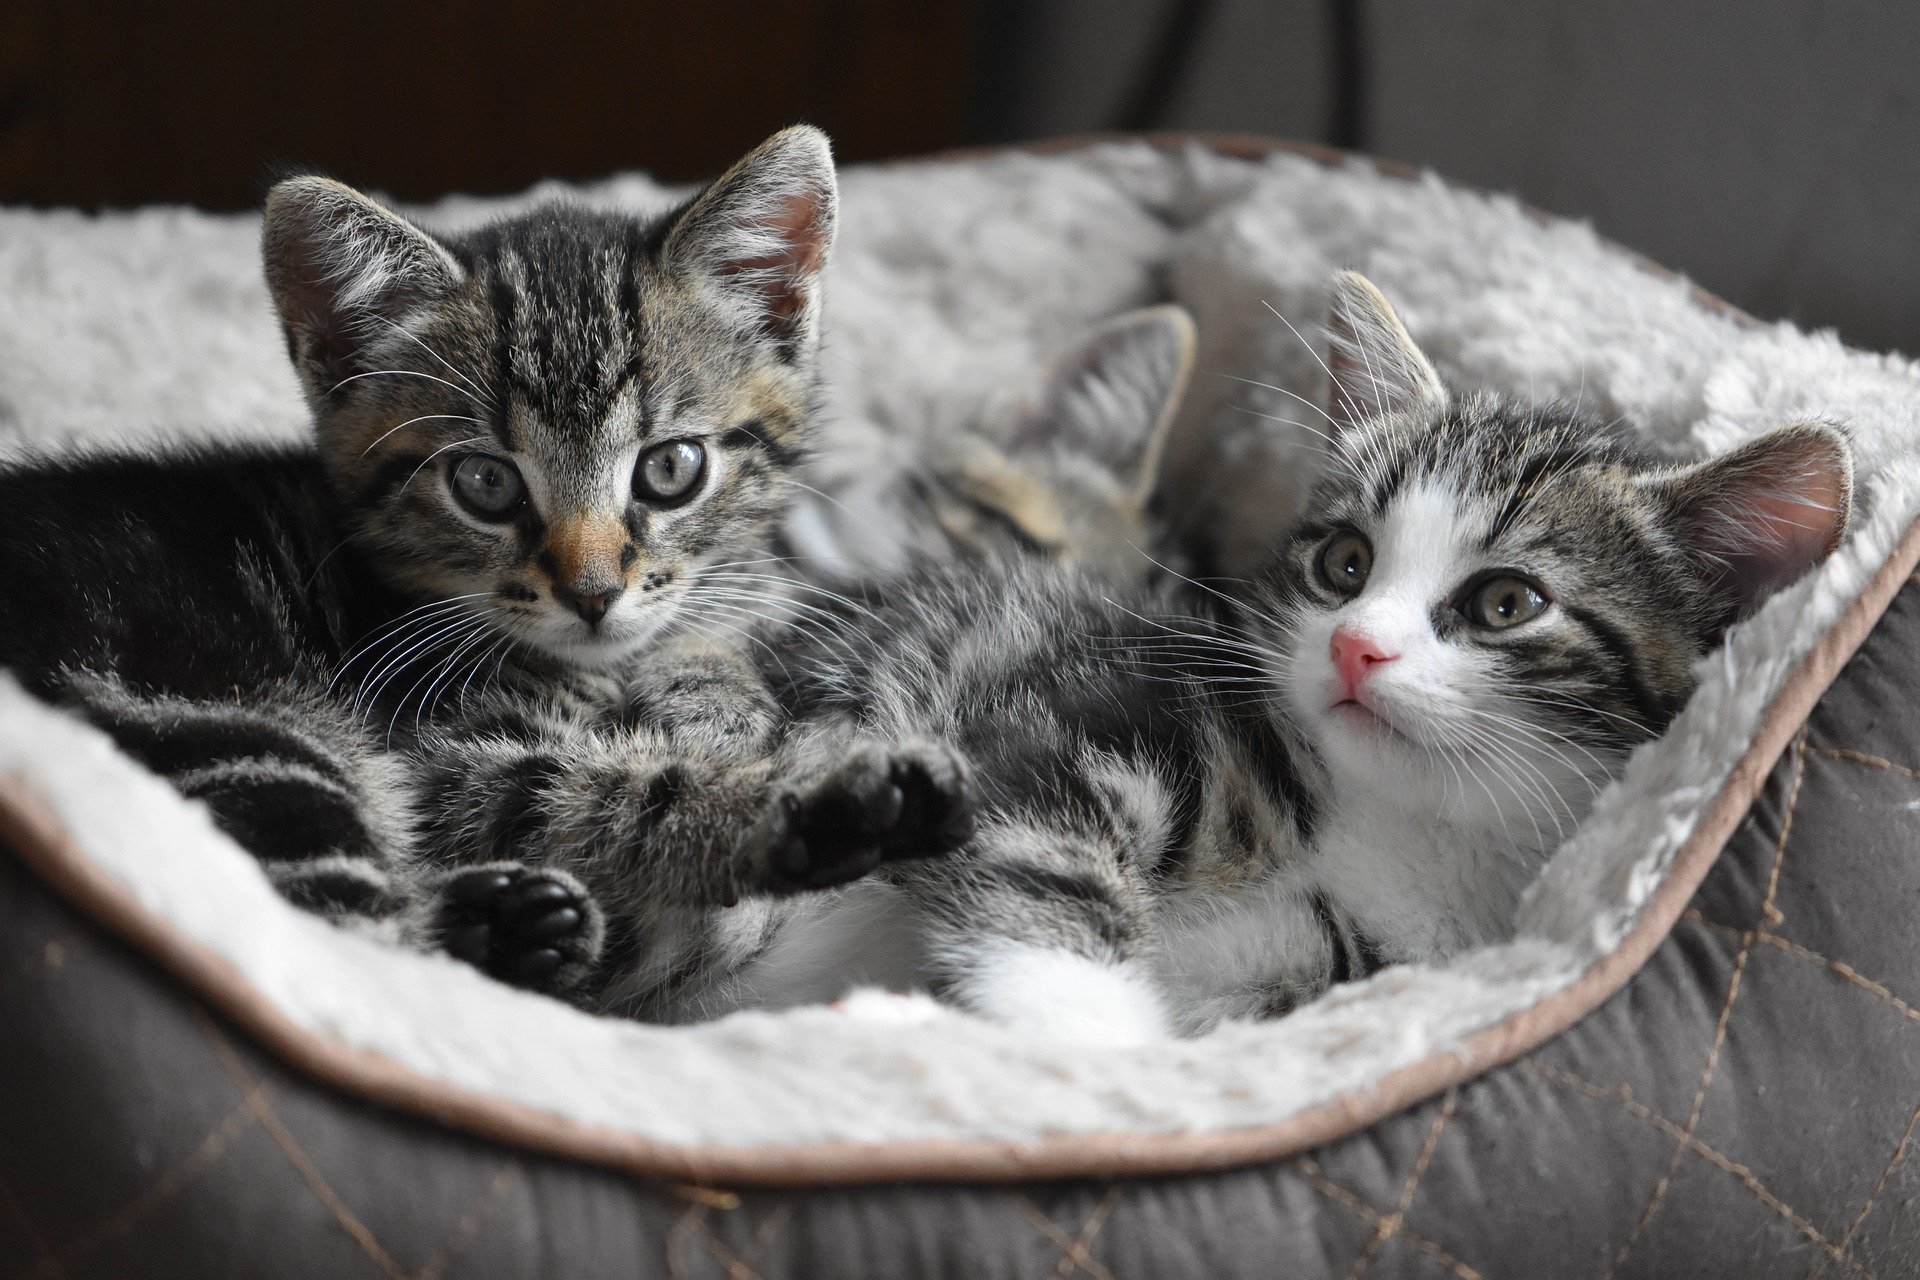 Why do cats reject their kittens?